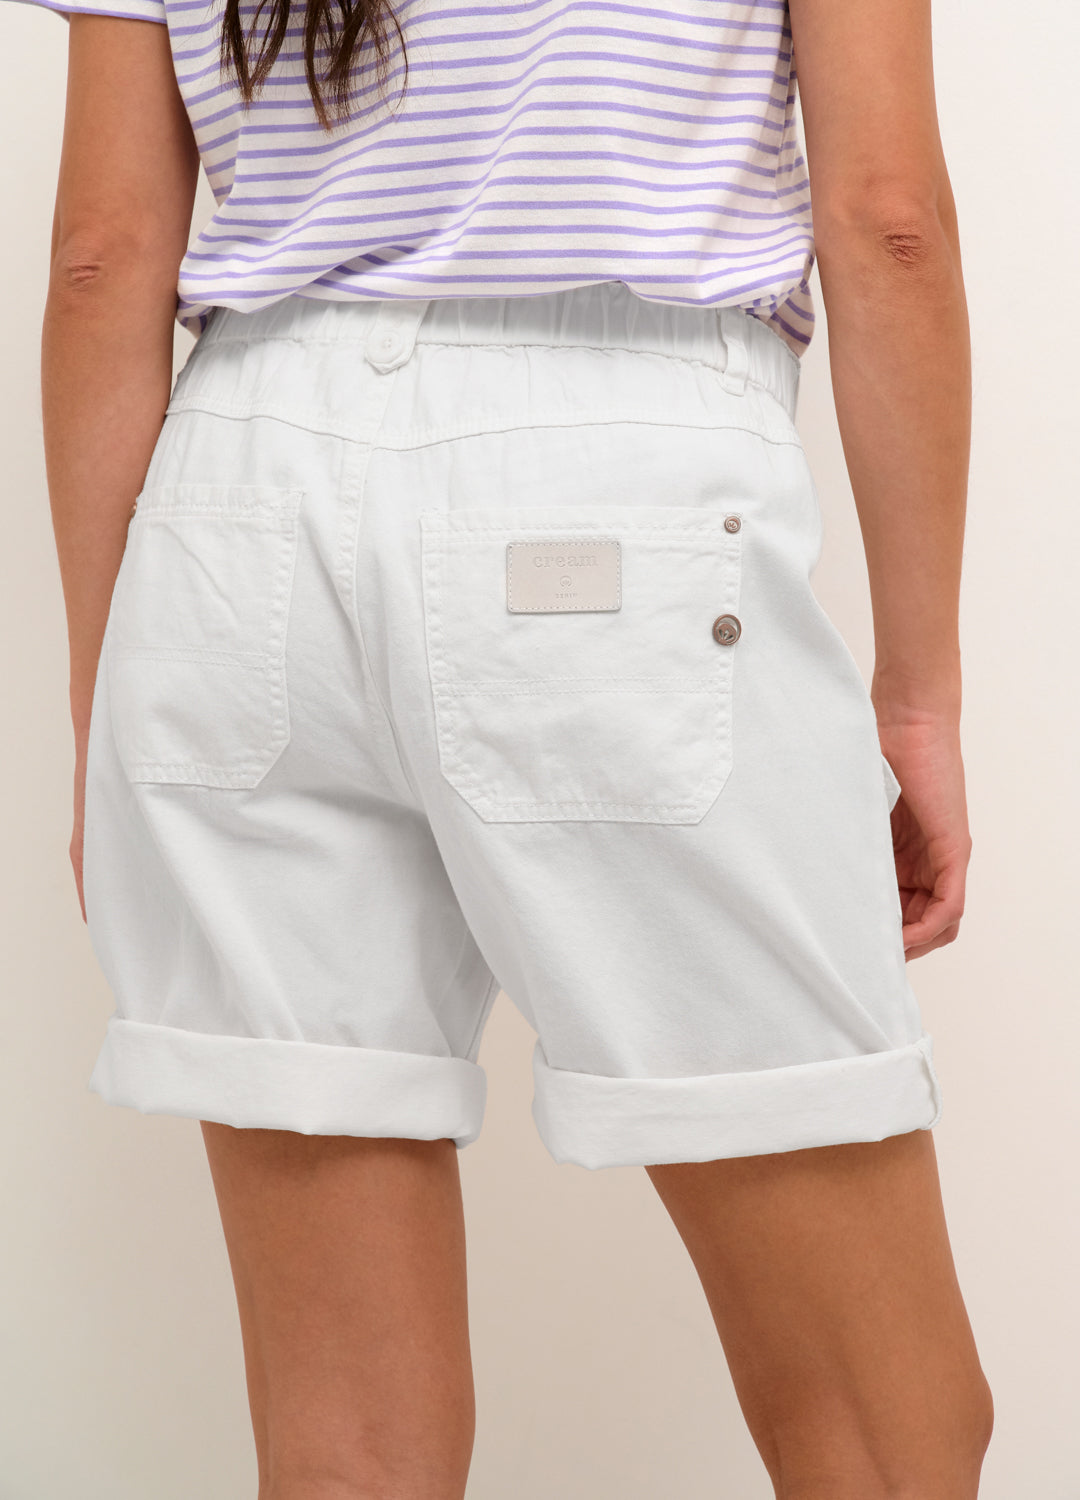 Detail back view of the Cream Clothing Denmark Munto Worker Shorts in Snow White cotton at Inner Beach Co, Toronto, Ontario, Canada